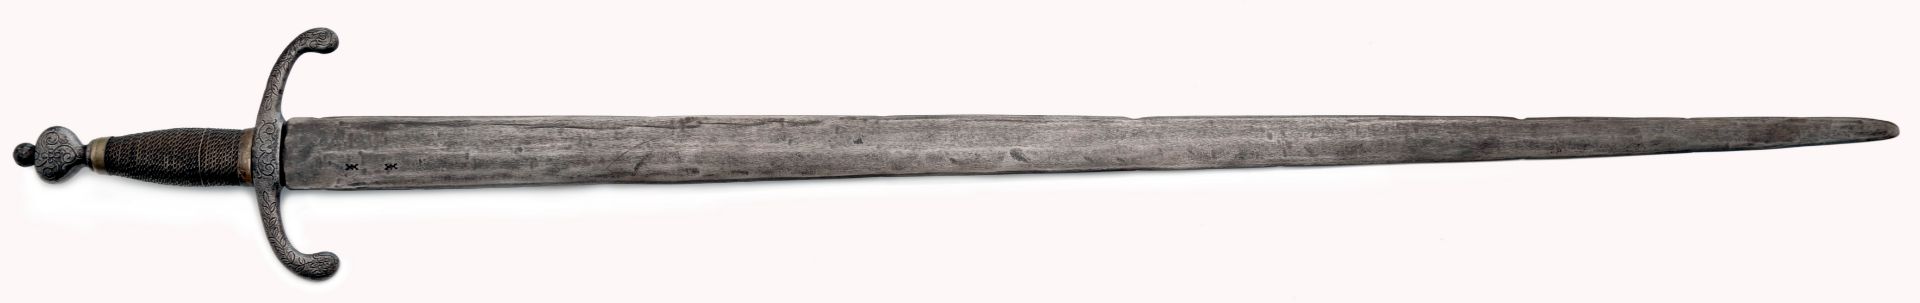 Sword, Historicism in the style of the 16th century - Image 3 of 3